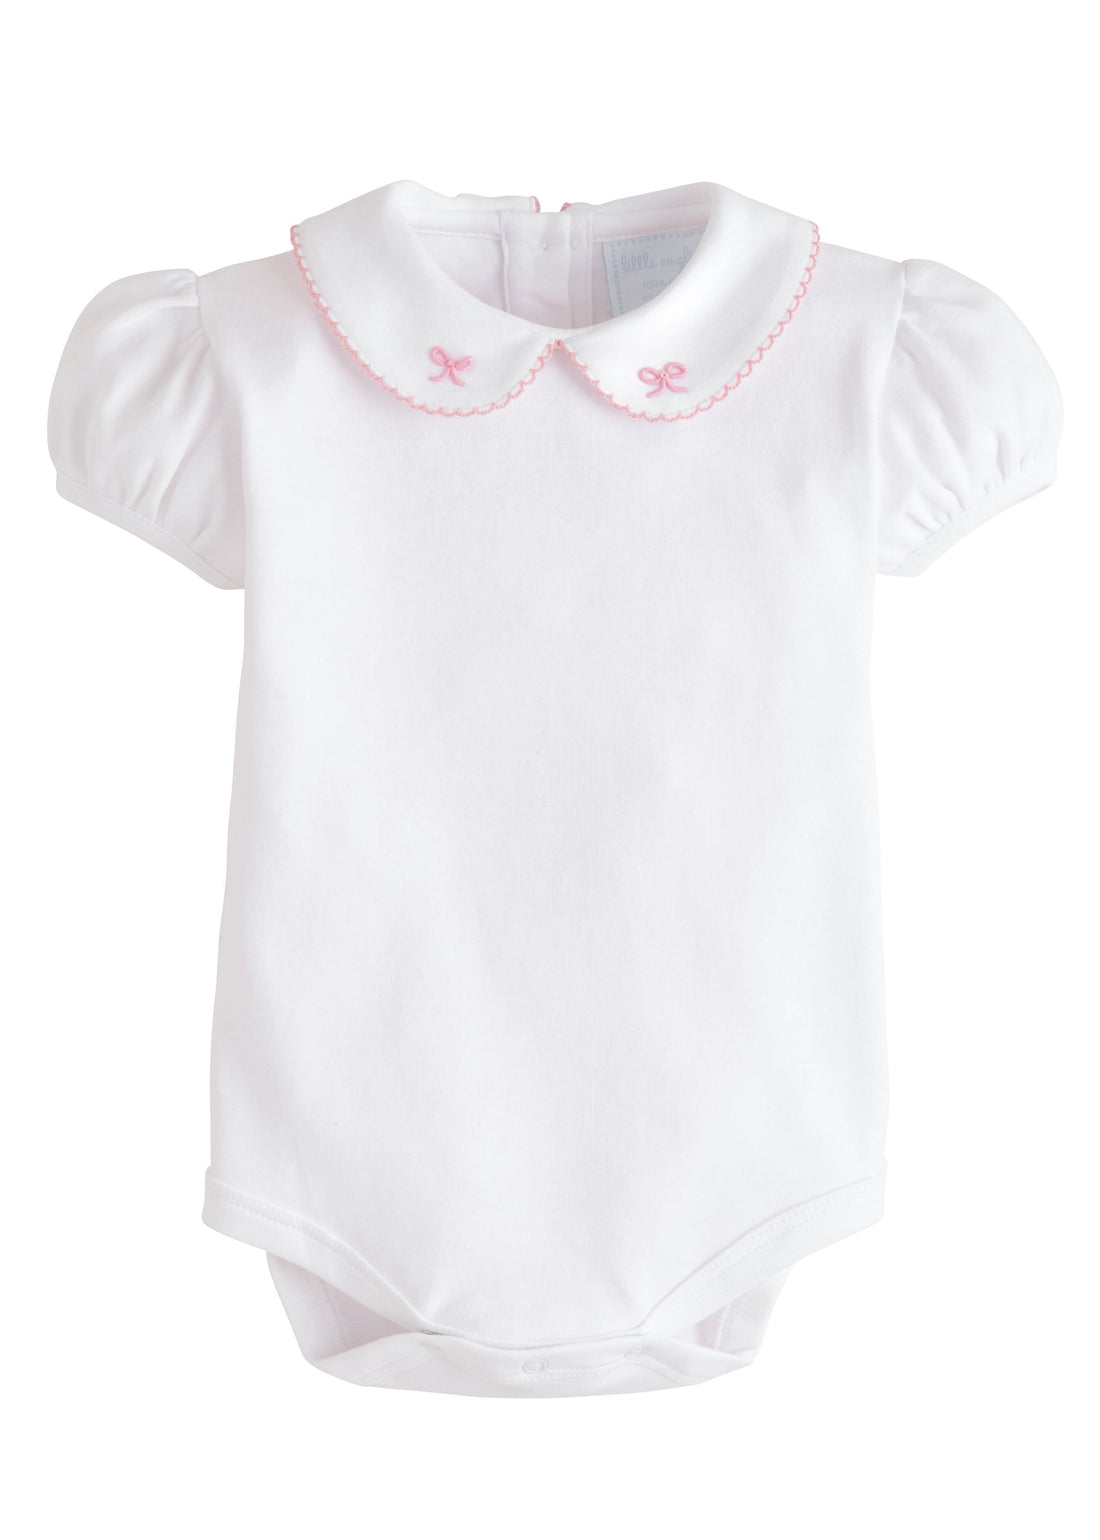 Little English classic baby girl clothing, onesie with pink pinpoint bow, traditional baby gift